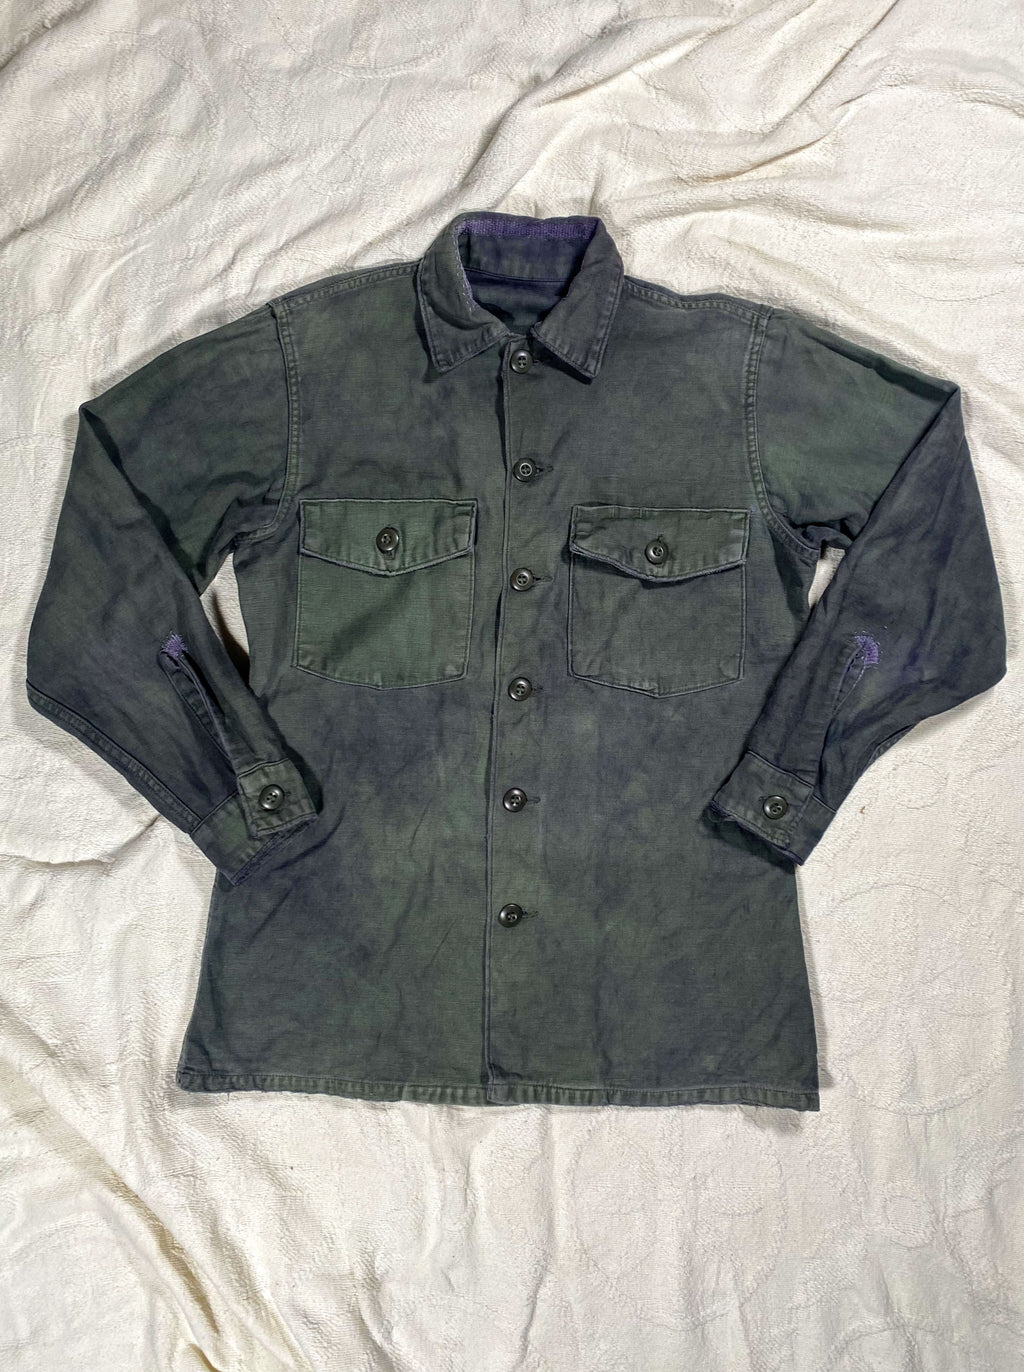 Organic Overdyed Black Vintage 50s Repaired Military Field Shirt (Unisex US Small)